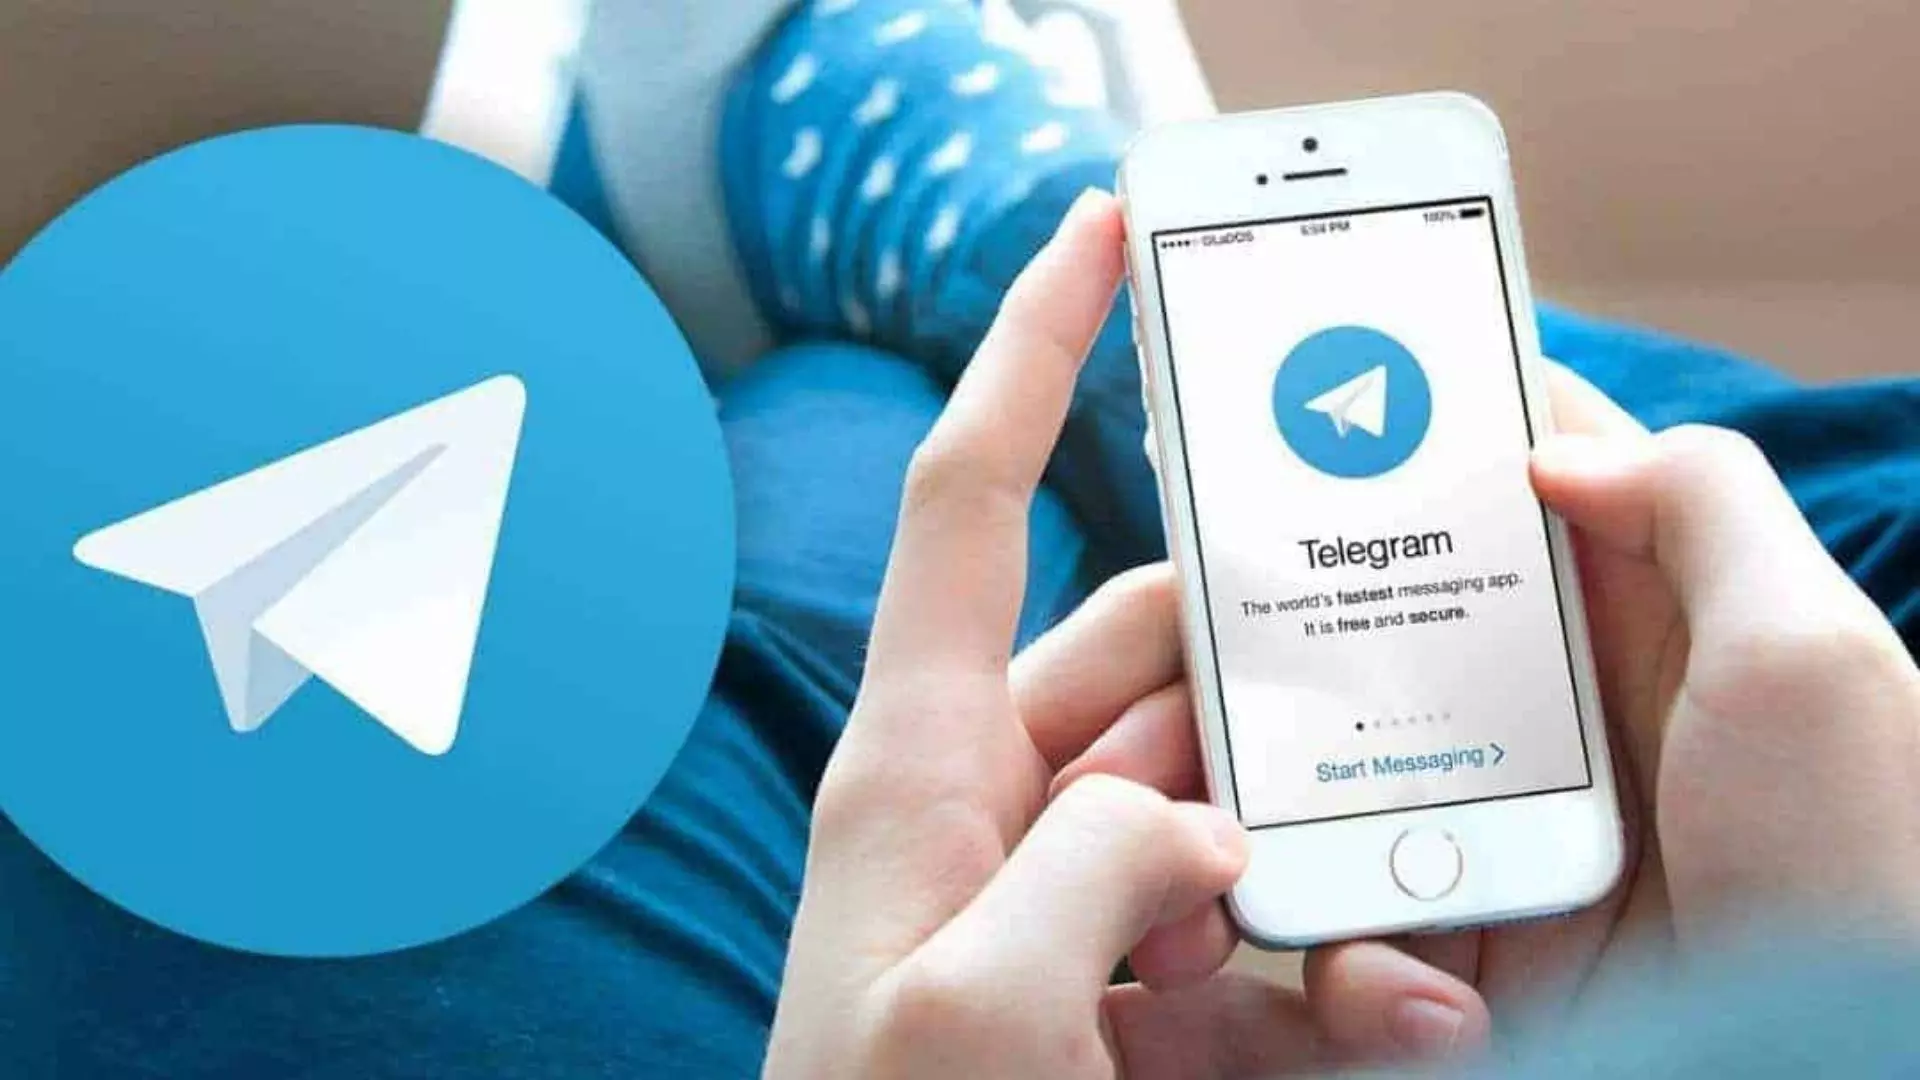 Telegram New Feature is Group Video Call Upto 1000 People